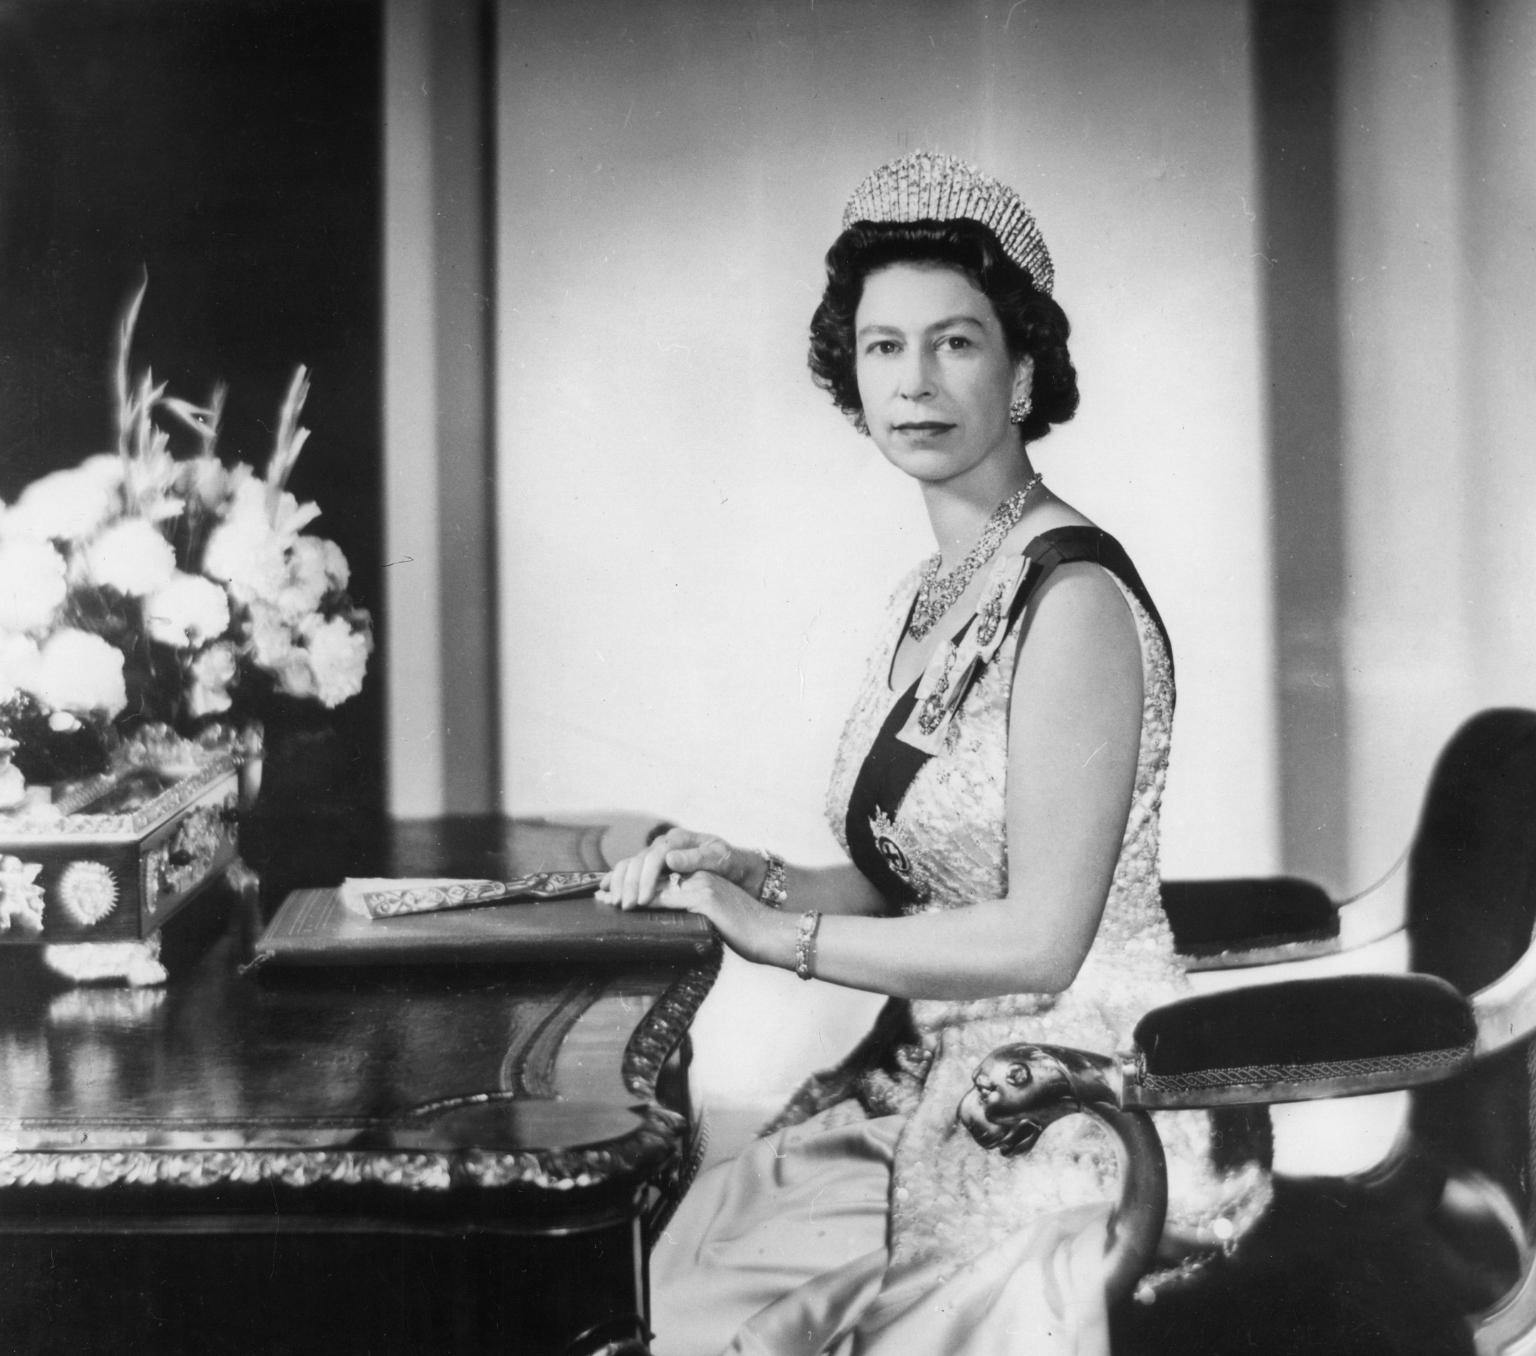 Queen Elizabeth, wearing a tiara and sash, sits at a table and looks at the camera.